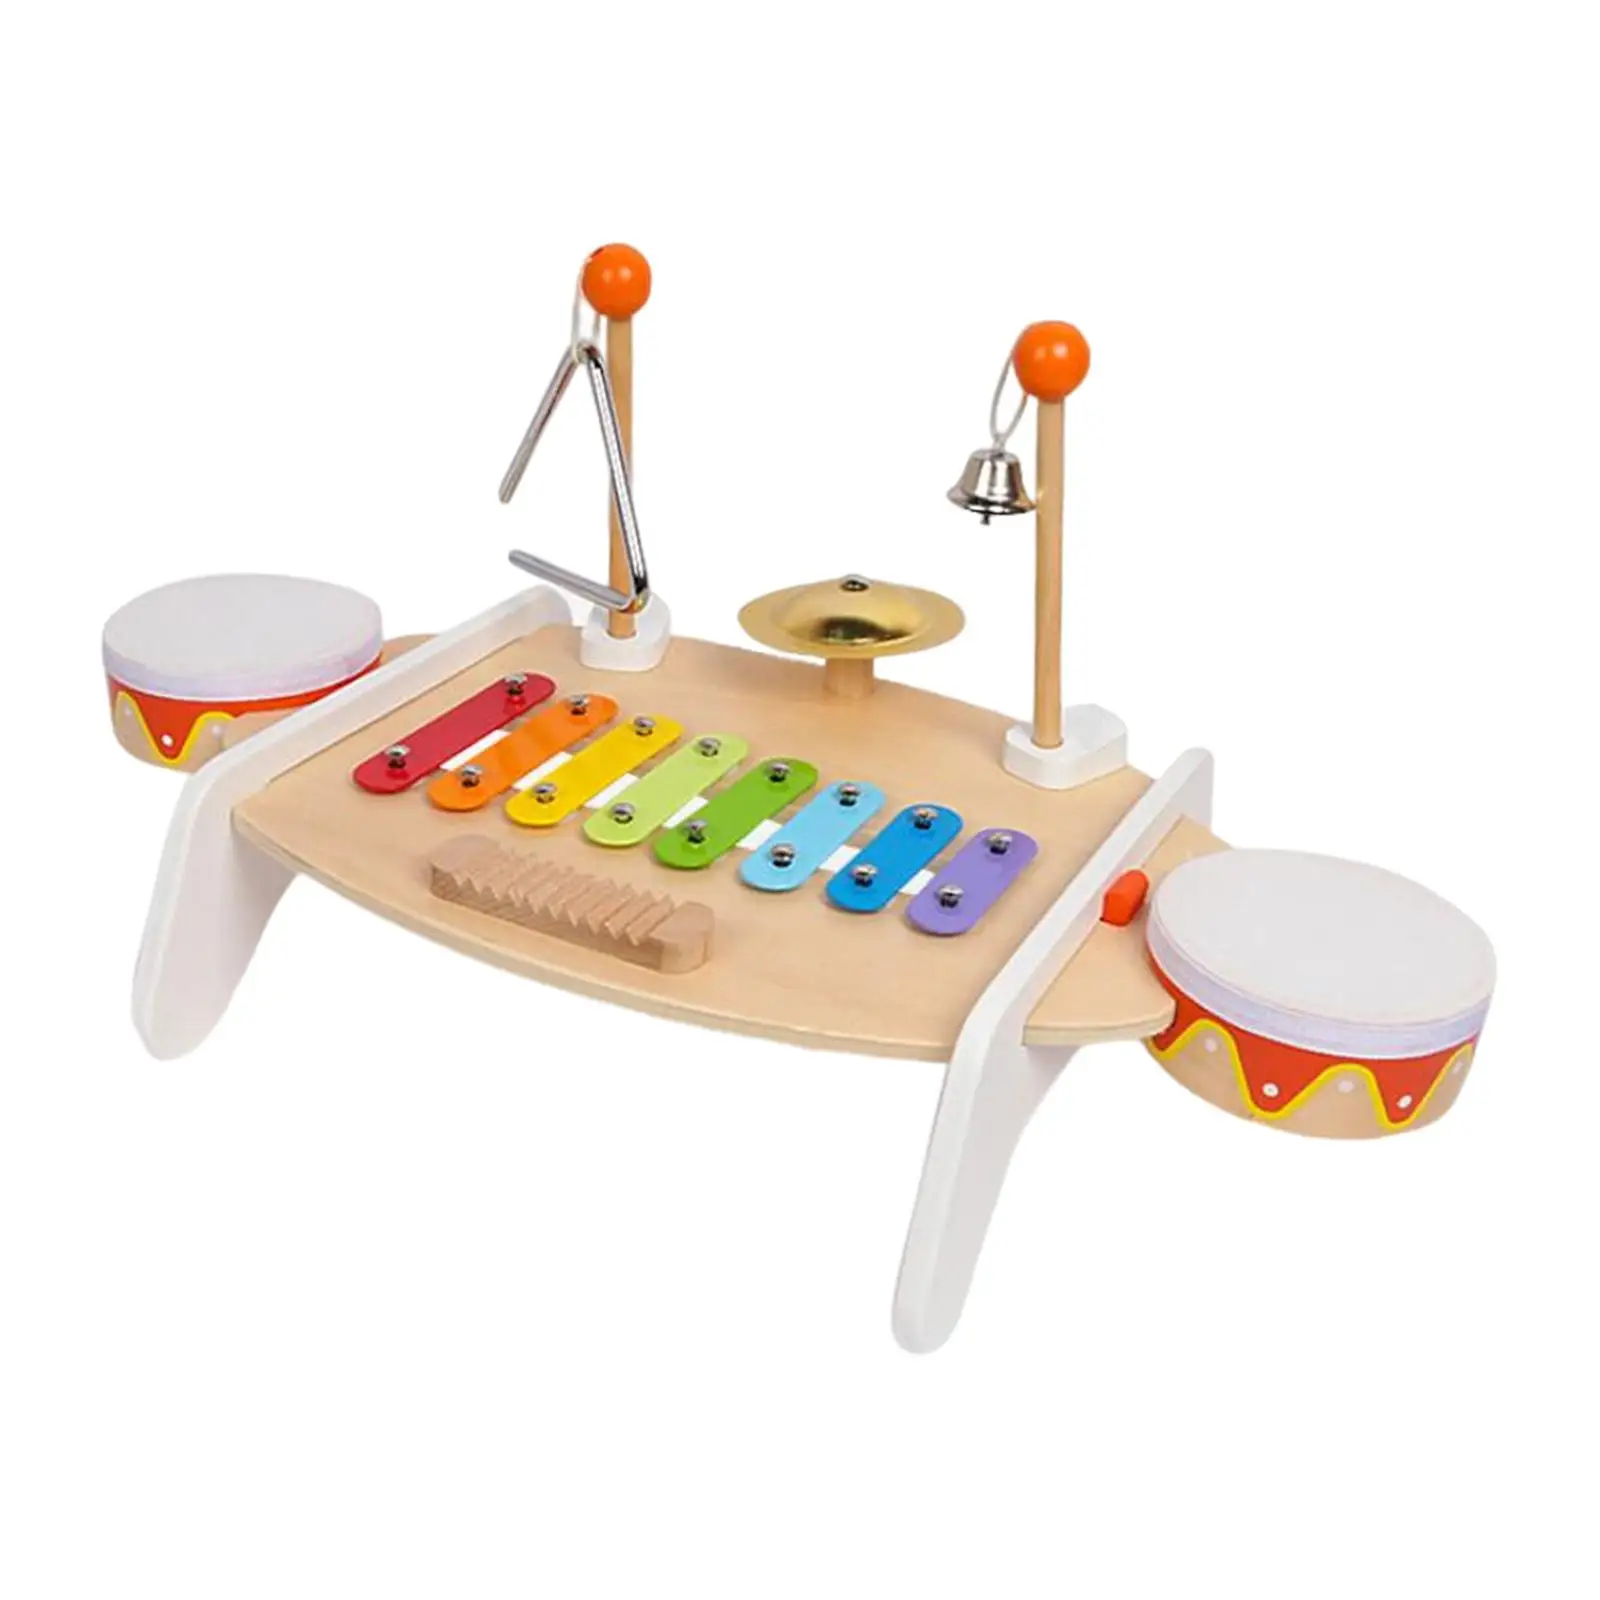 

Multifunction Xylophone Toy Educational and Sound Toy Musical Instruments Wooden Percussion Toy for Boys Beginner Kids Gift